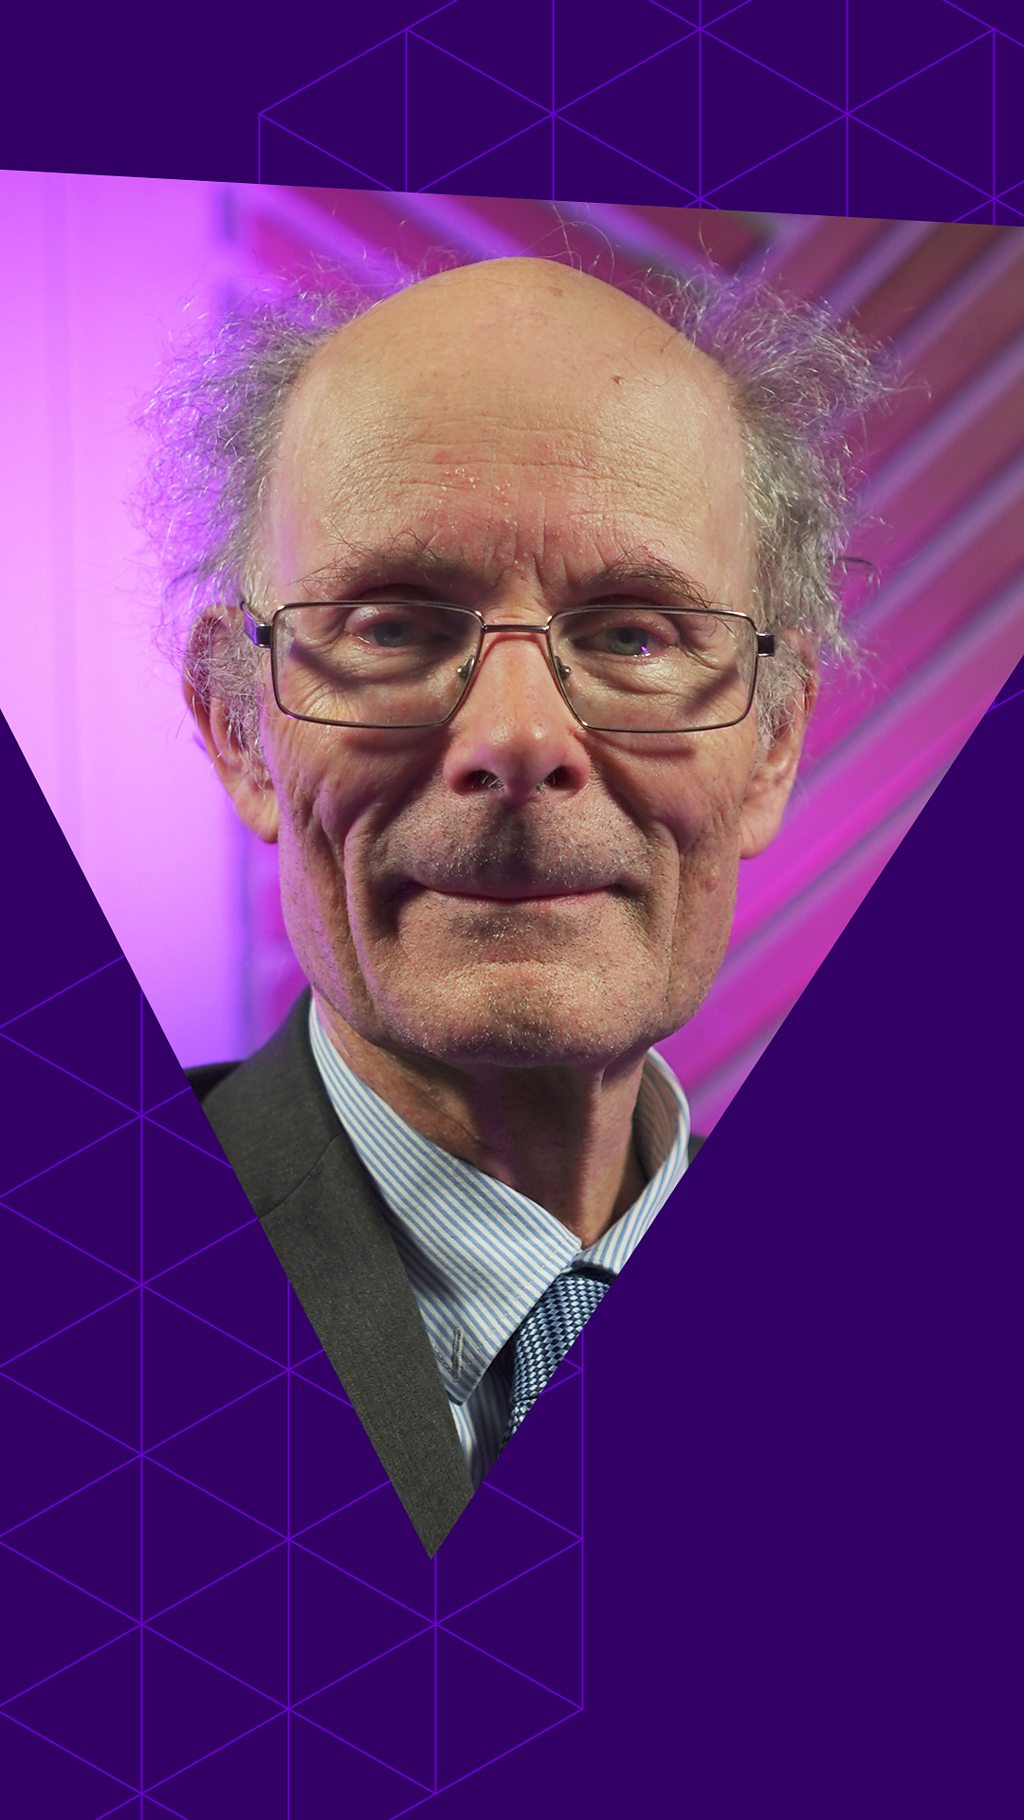 John Curtice looking into the lens with a purple background and a purple triangle graphic template in front